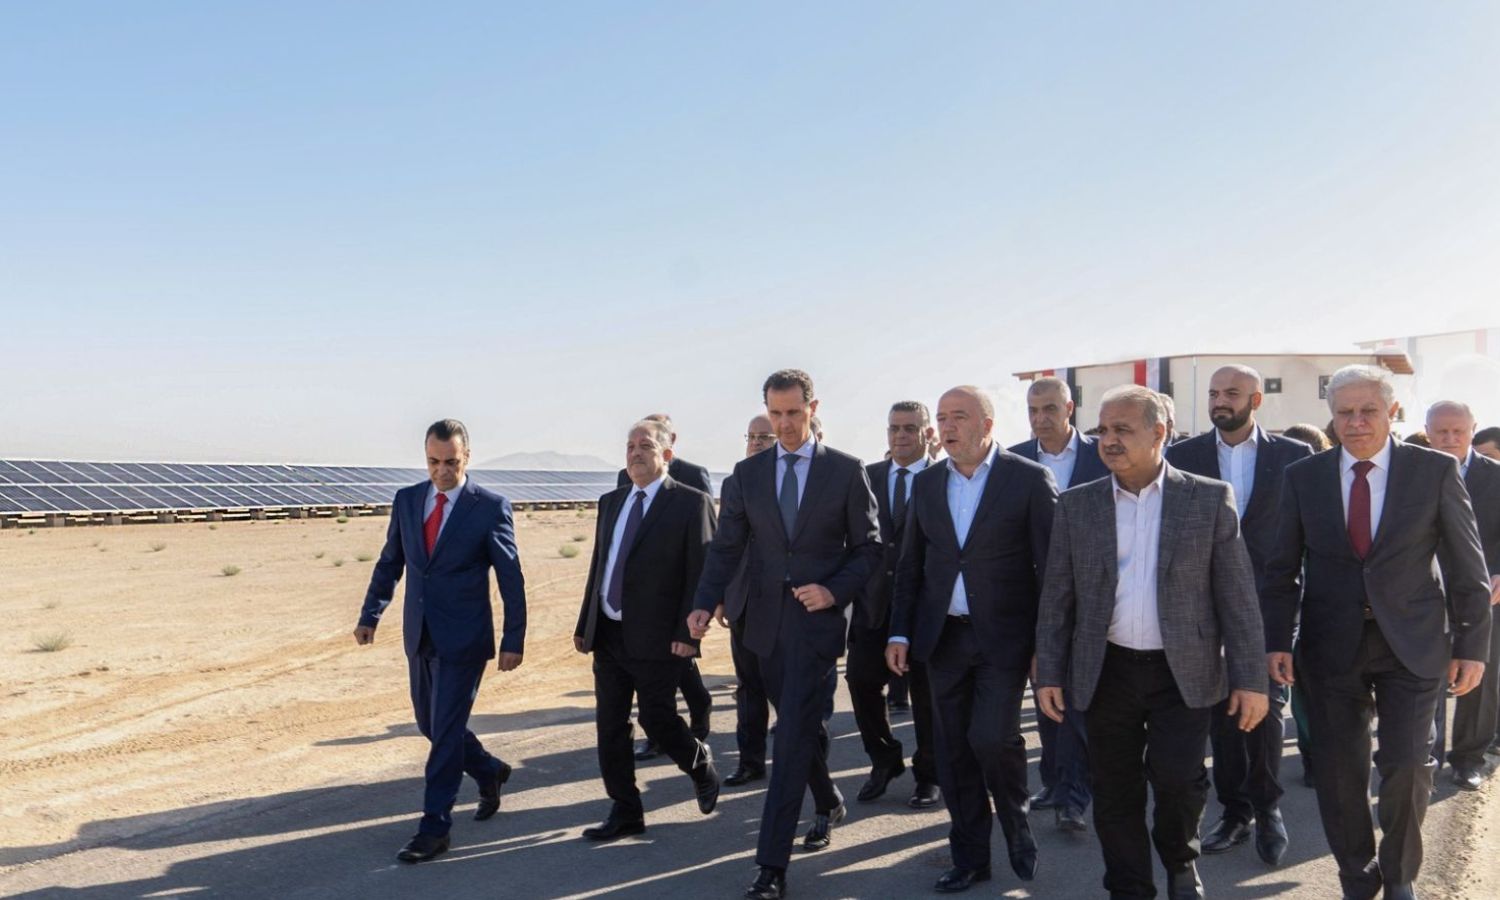 The head of the Syrian regime, Bashar al-Assad, next to businessman Badih al-Droubi during the opening of the solar power plant in Adra Industrial City east of Damascus - September 2022 (Syrian Presidency)